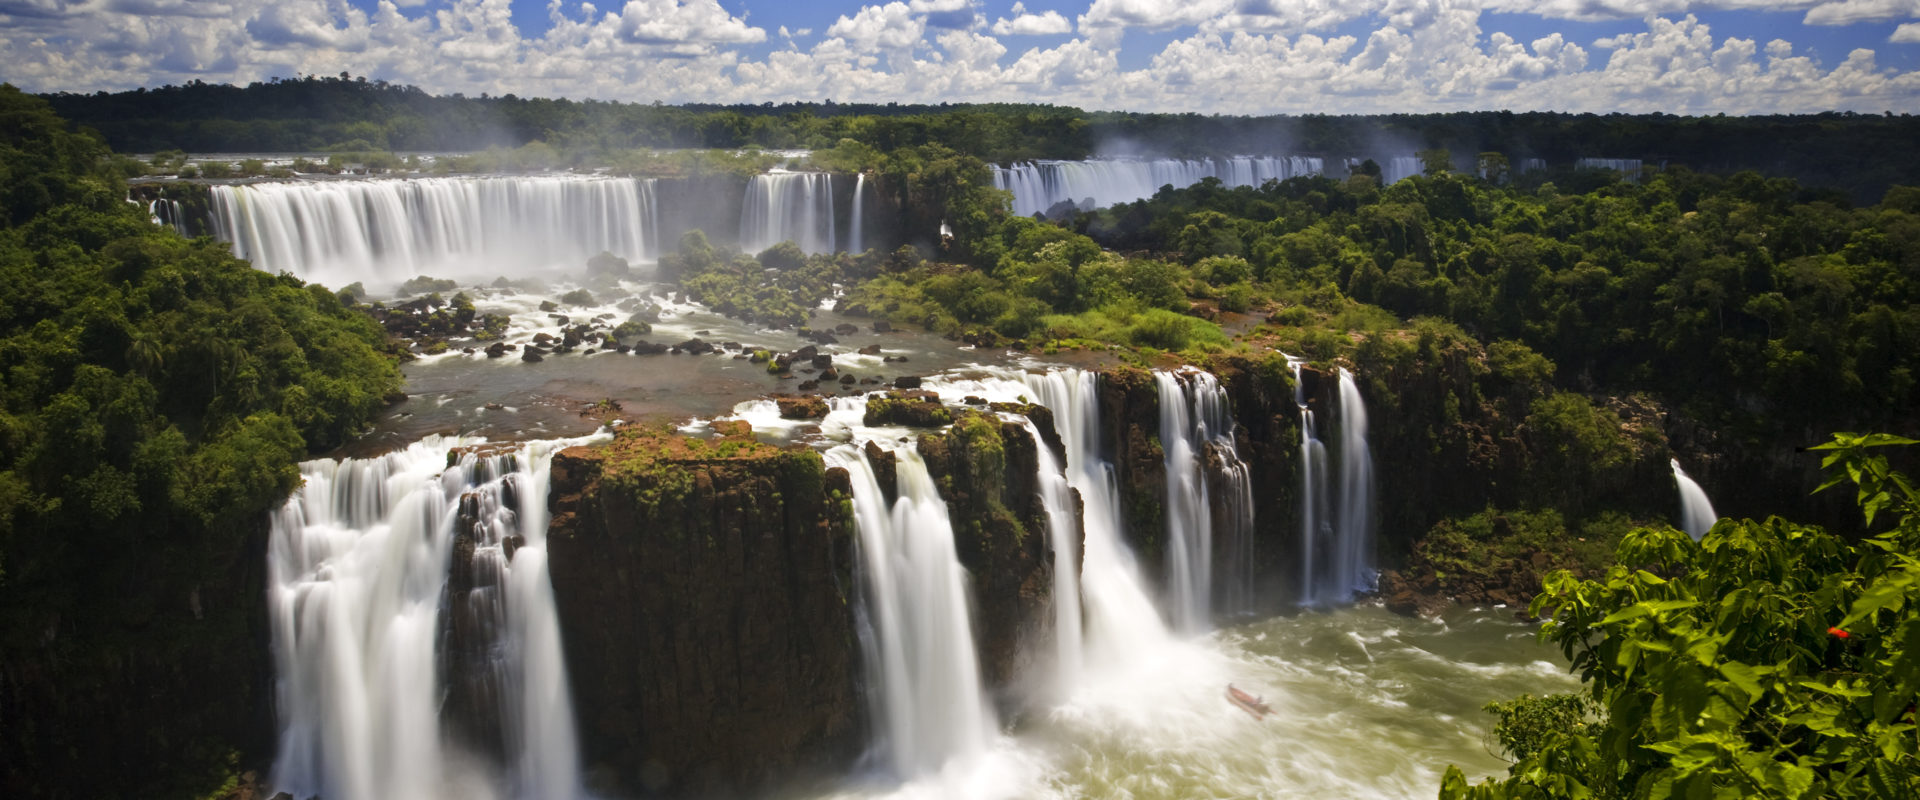 Iguaçu Falls is the largest series of waterfalls on the planet